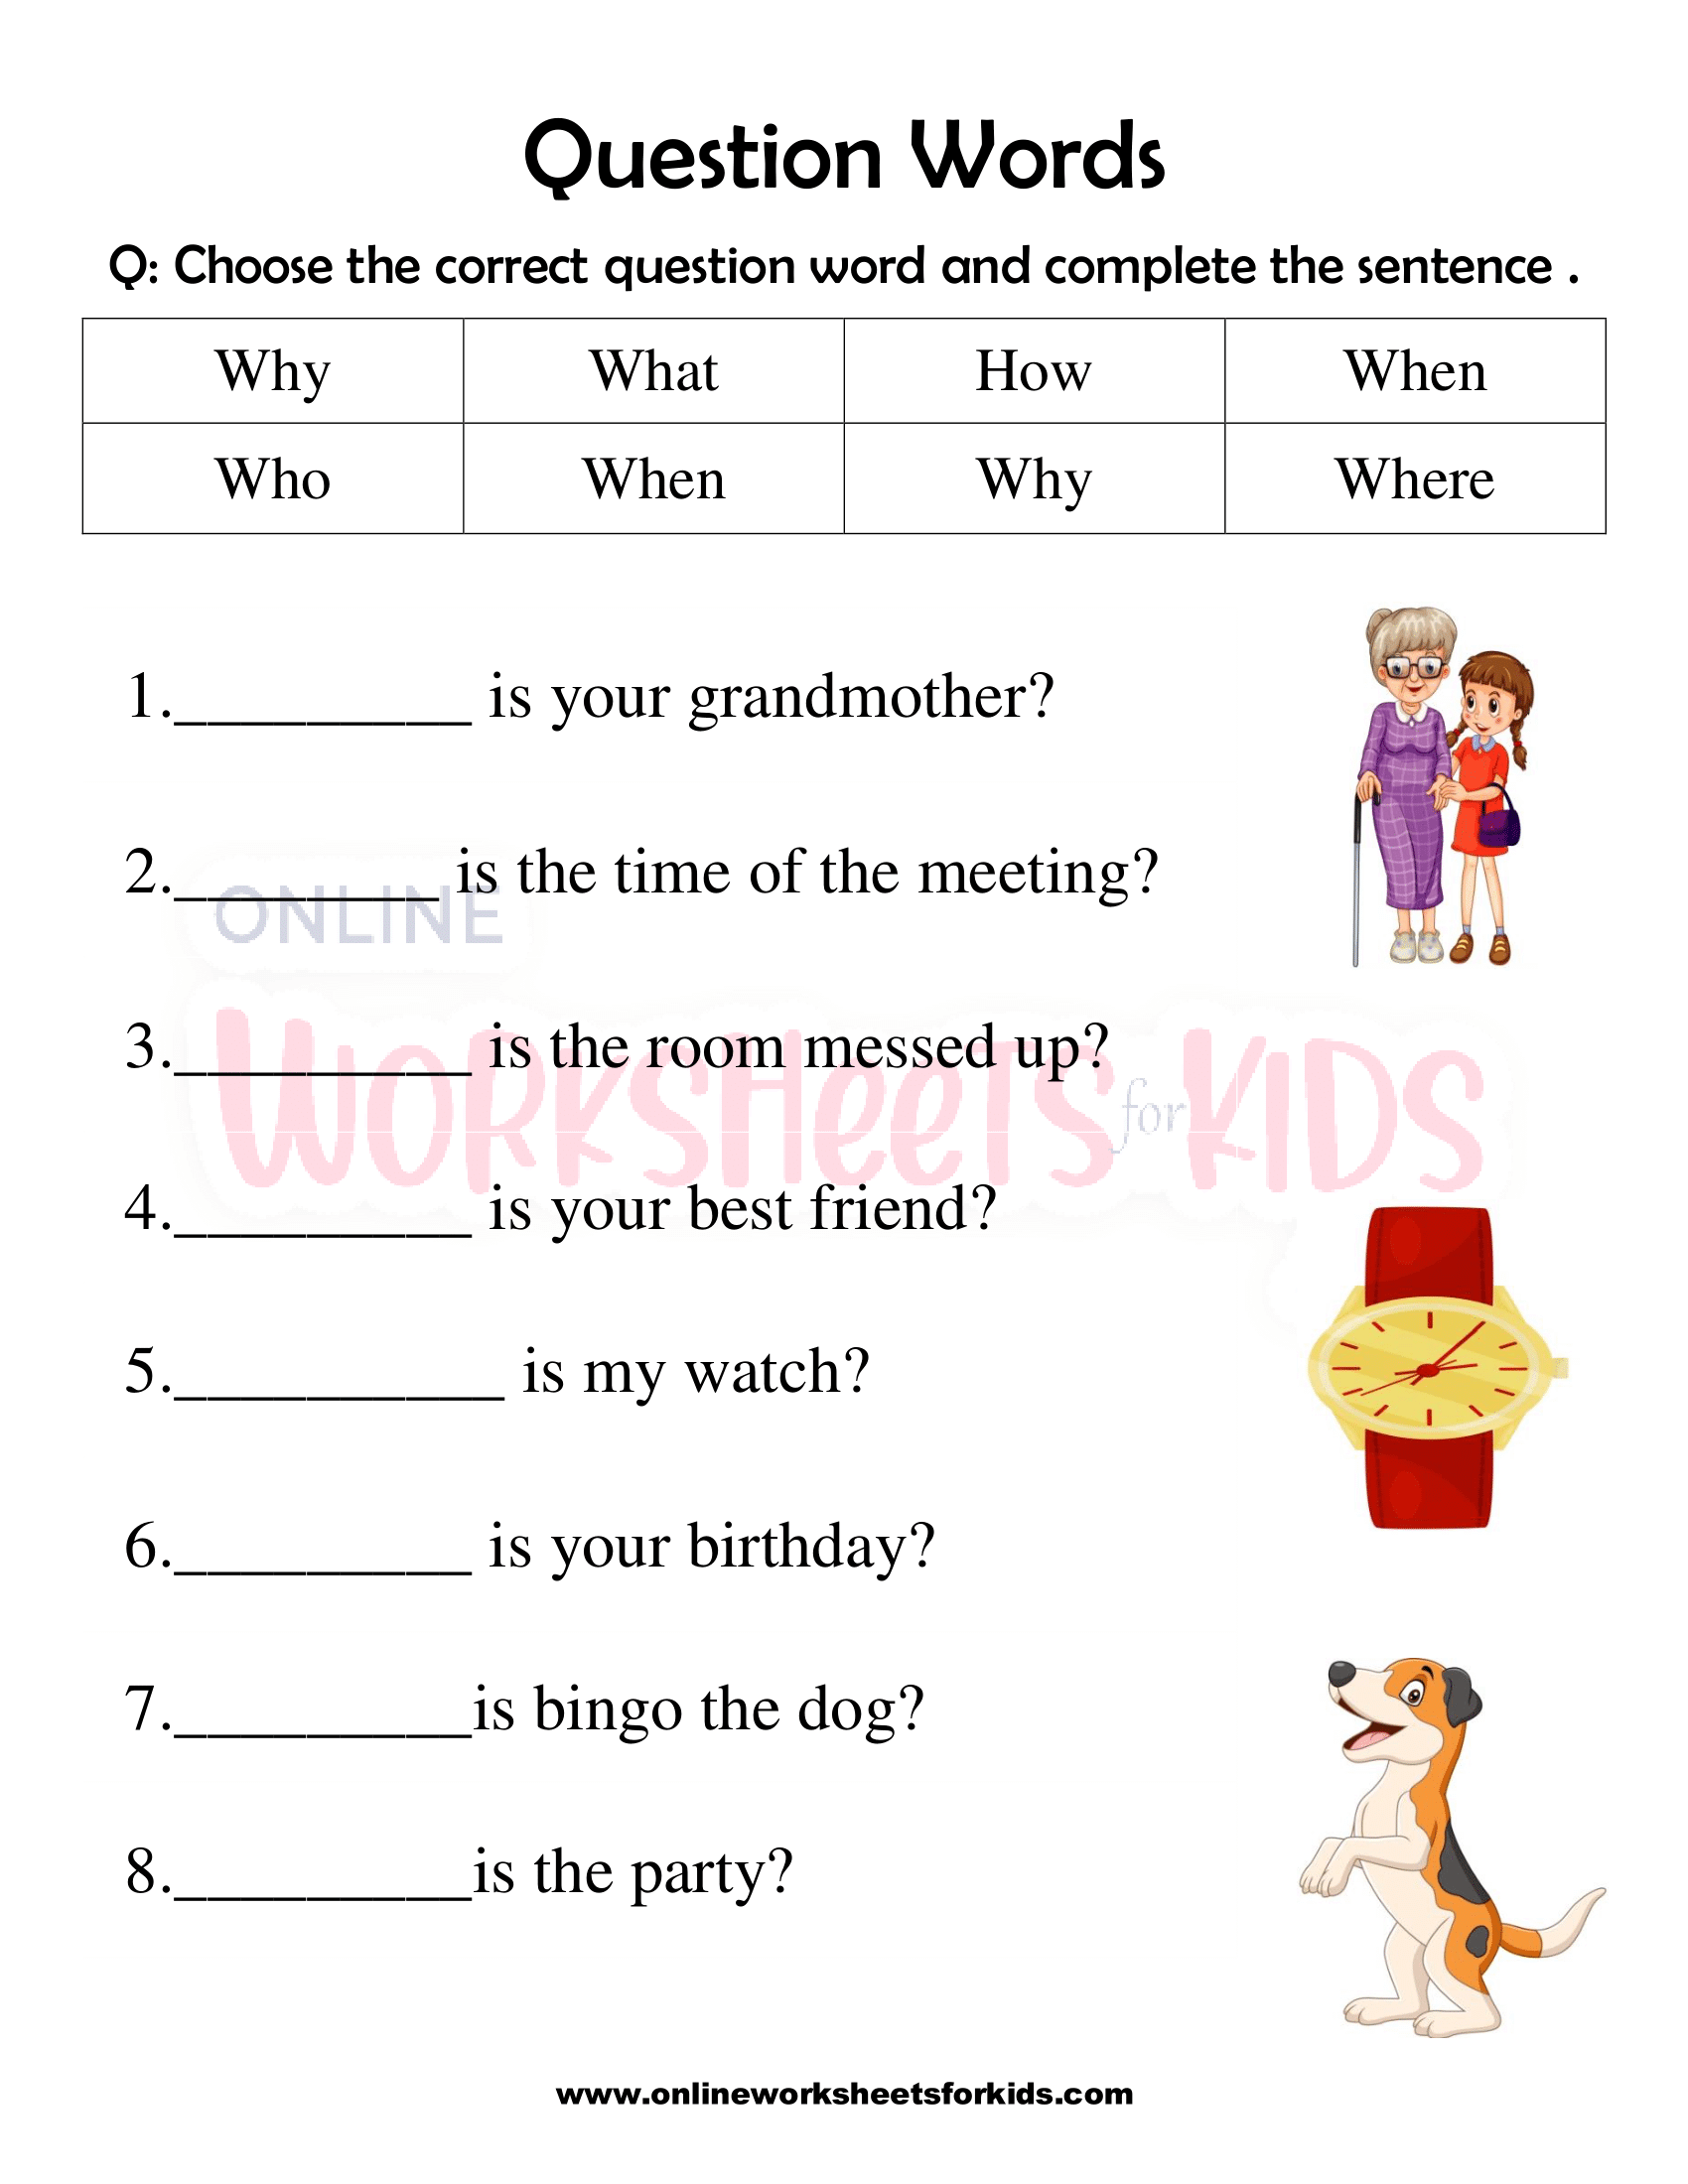 question-word-worksheet-for-grade-1-1